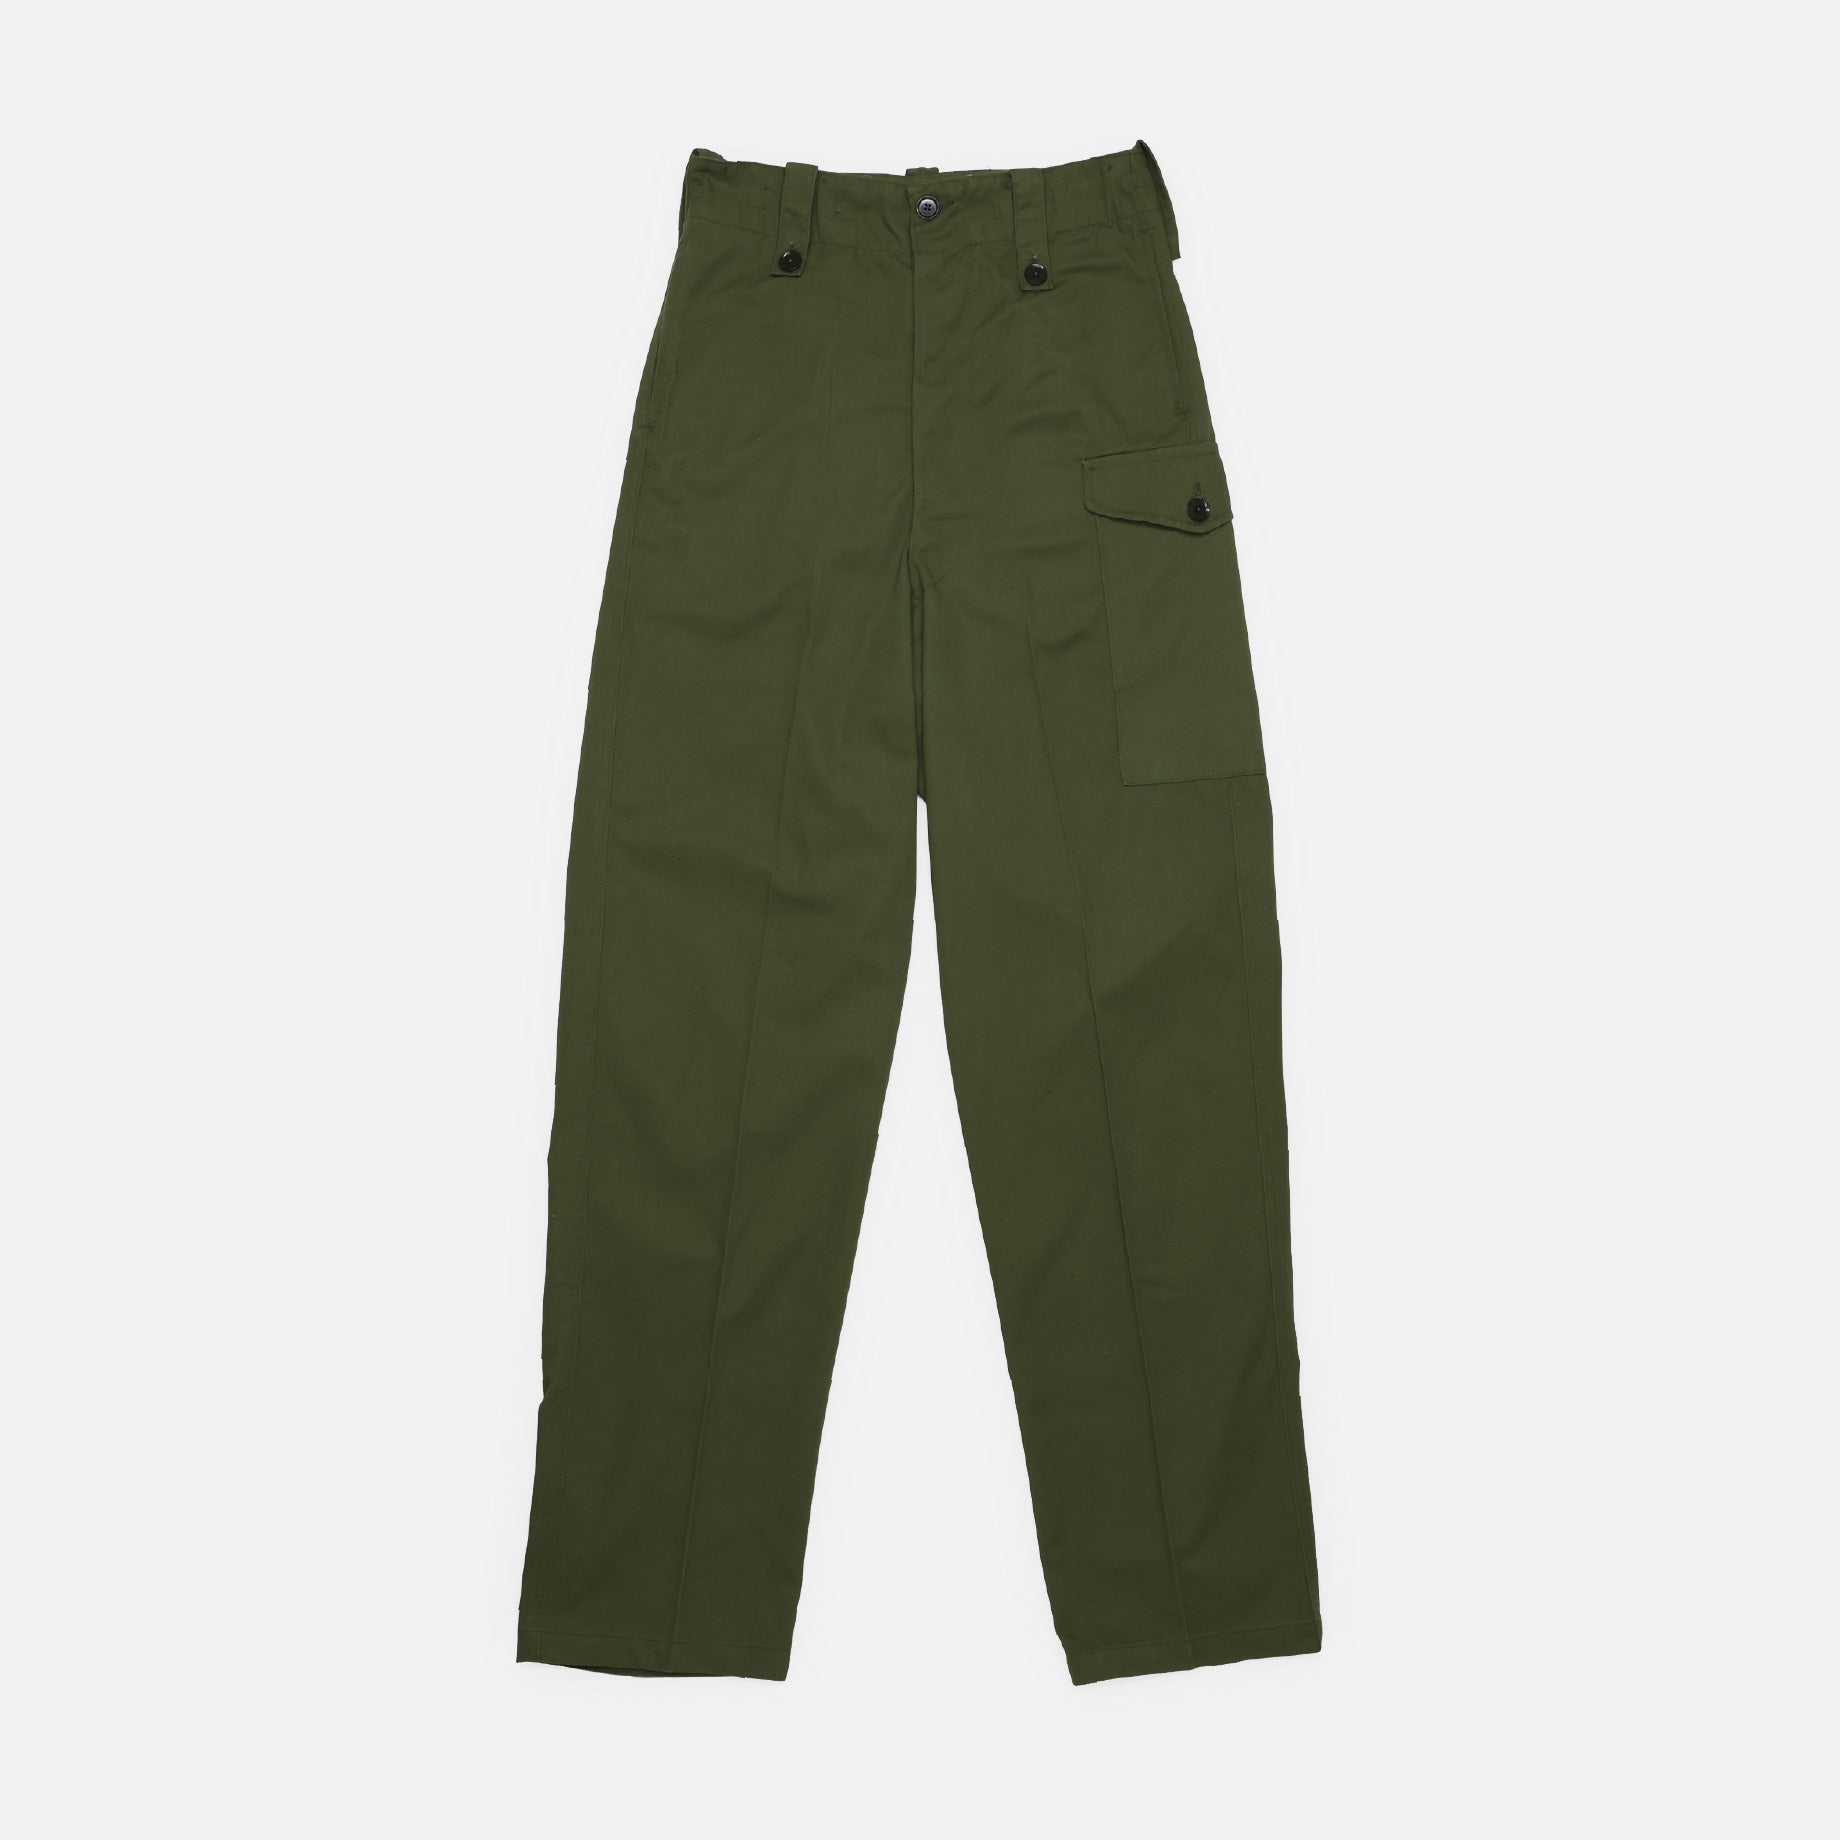 60'-70'S UK ARMY OVERALL GREEN TROUSERS